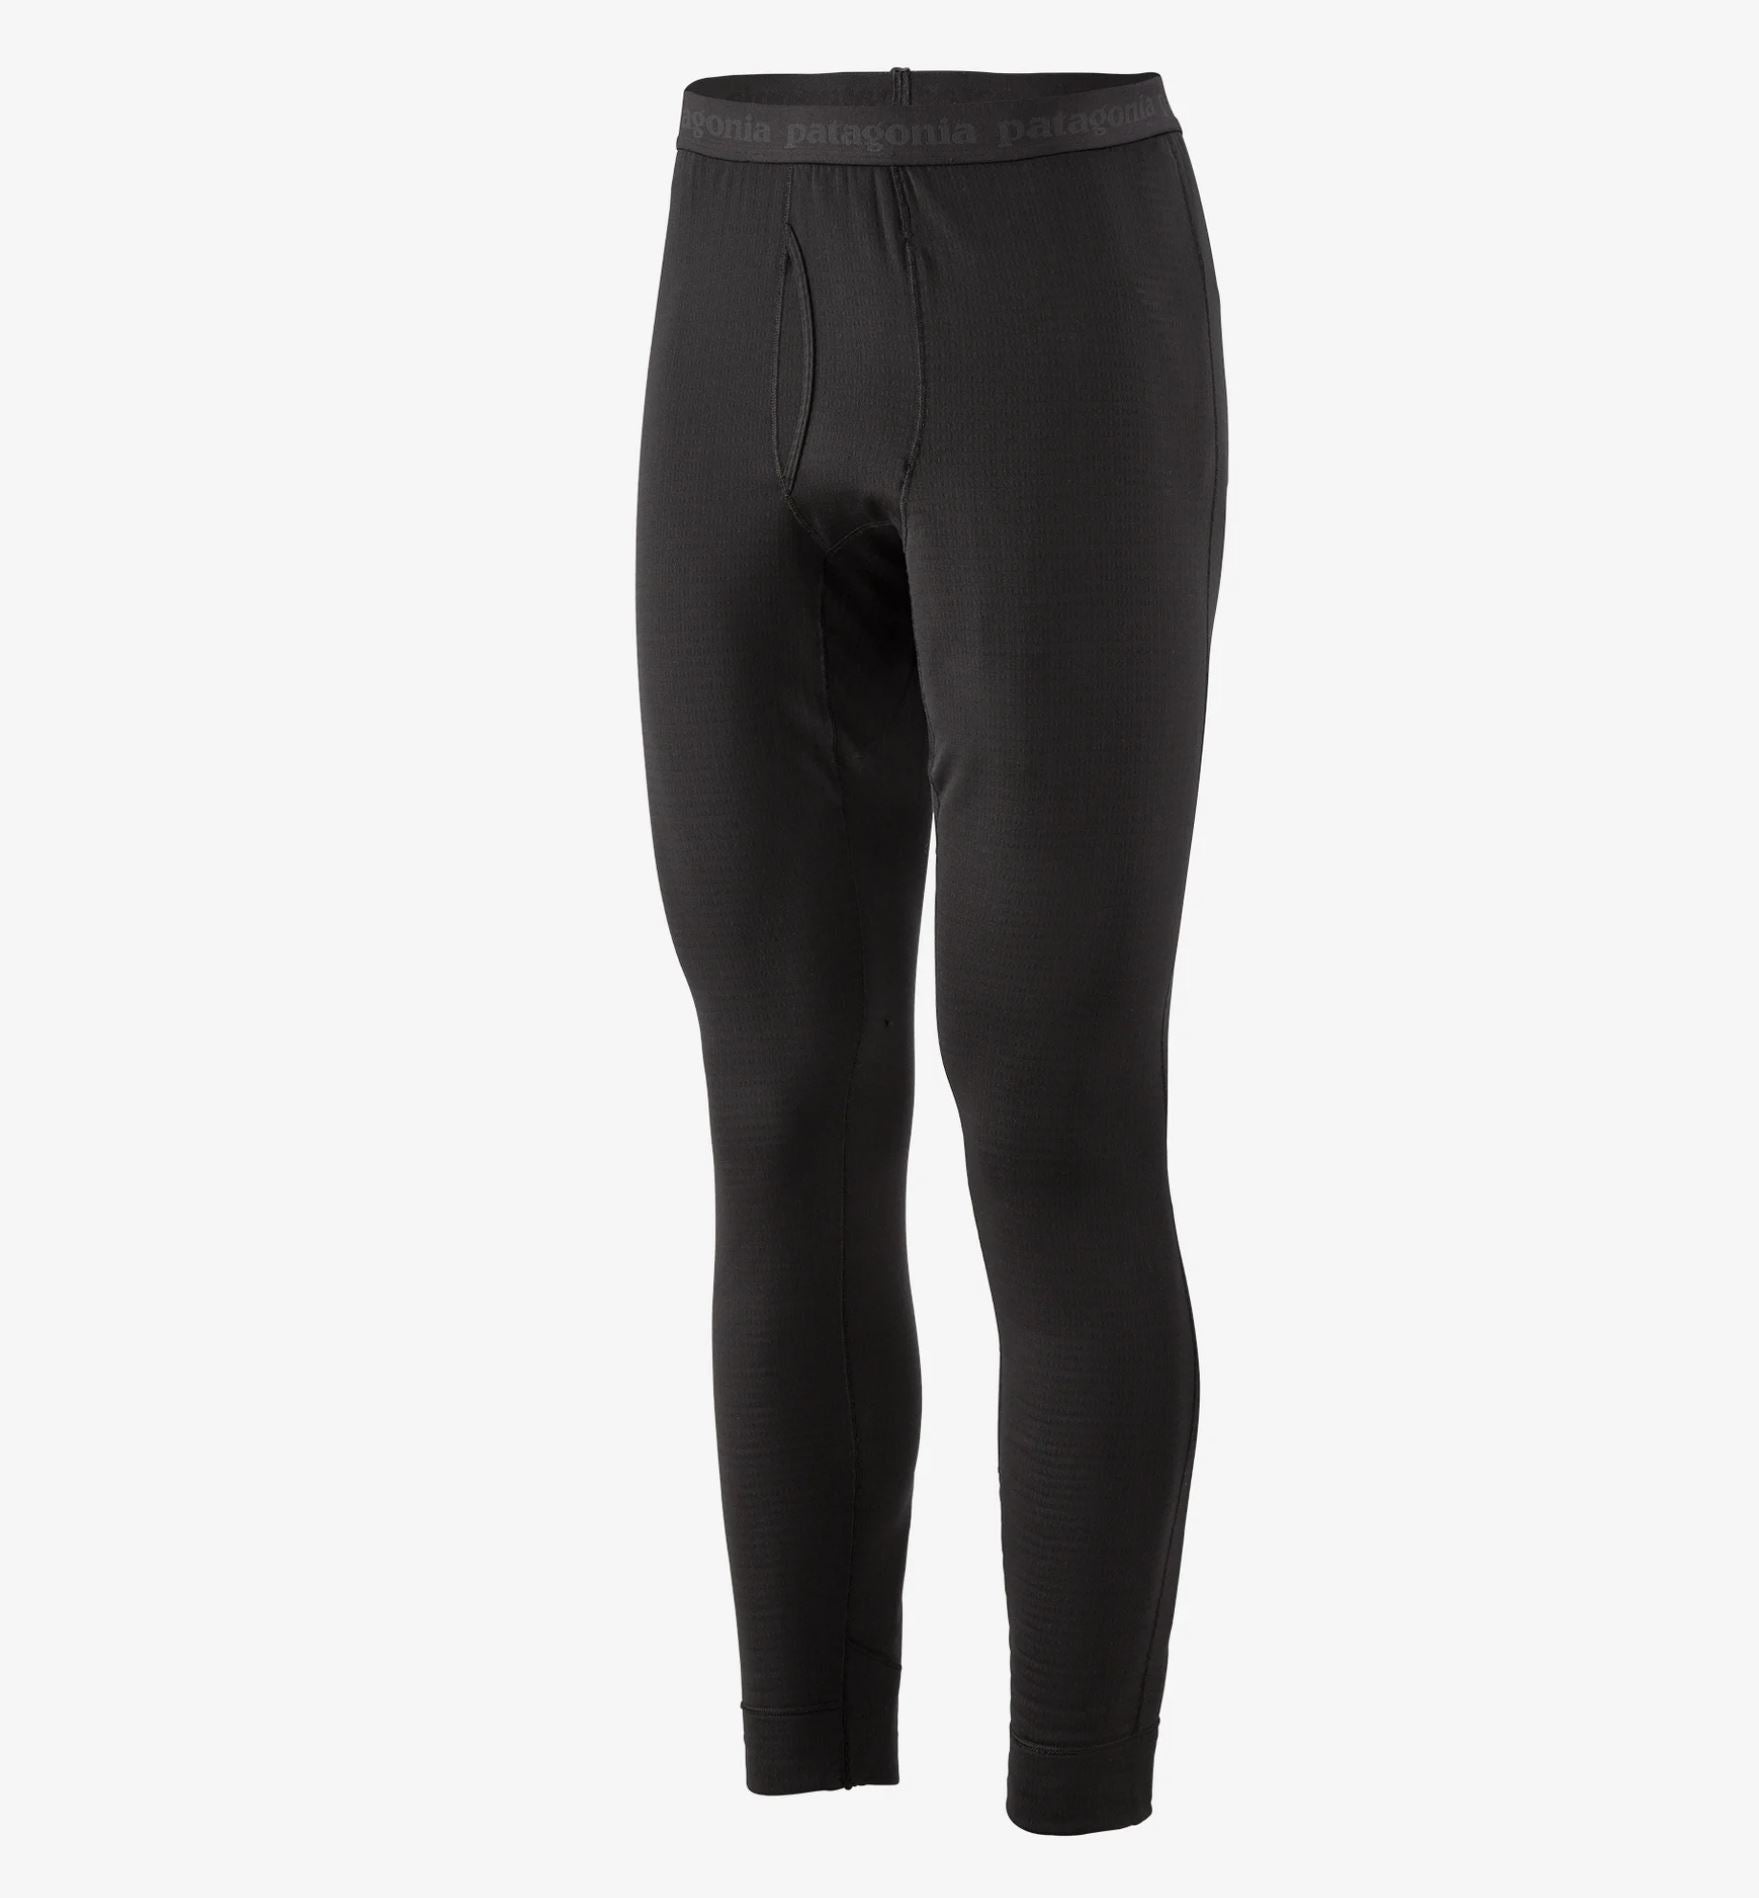 Products Tagged pants - Eastside Sports